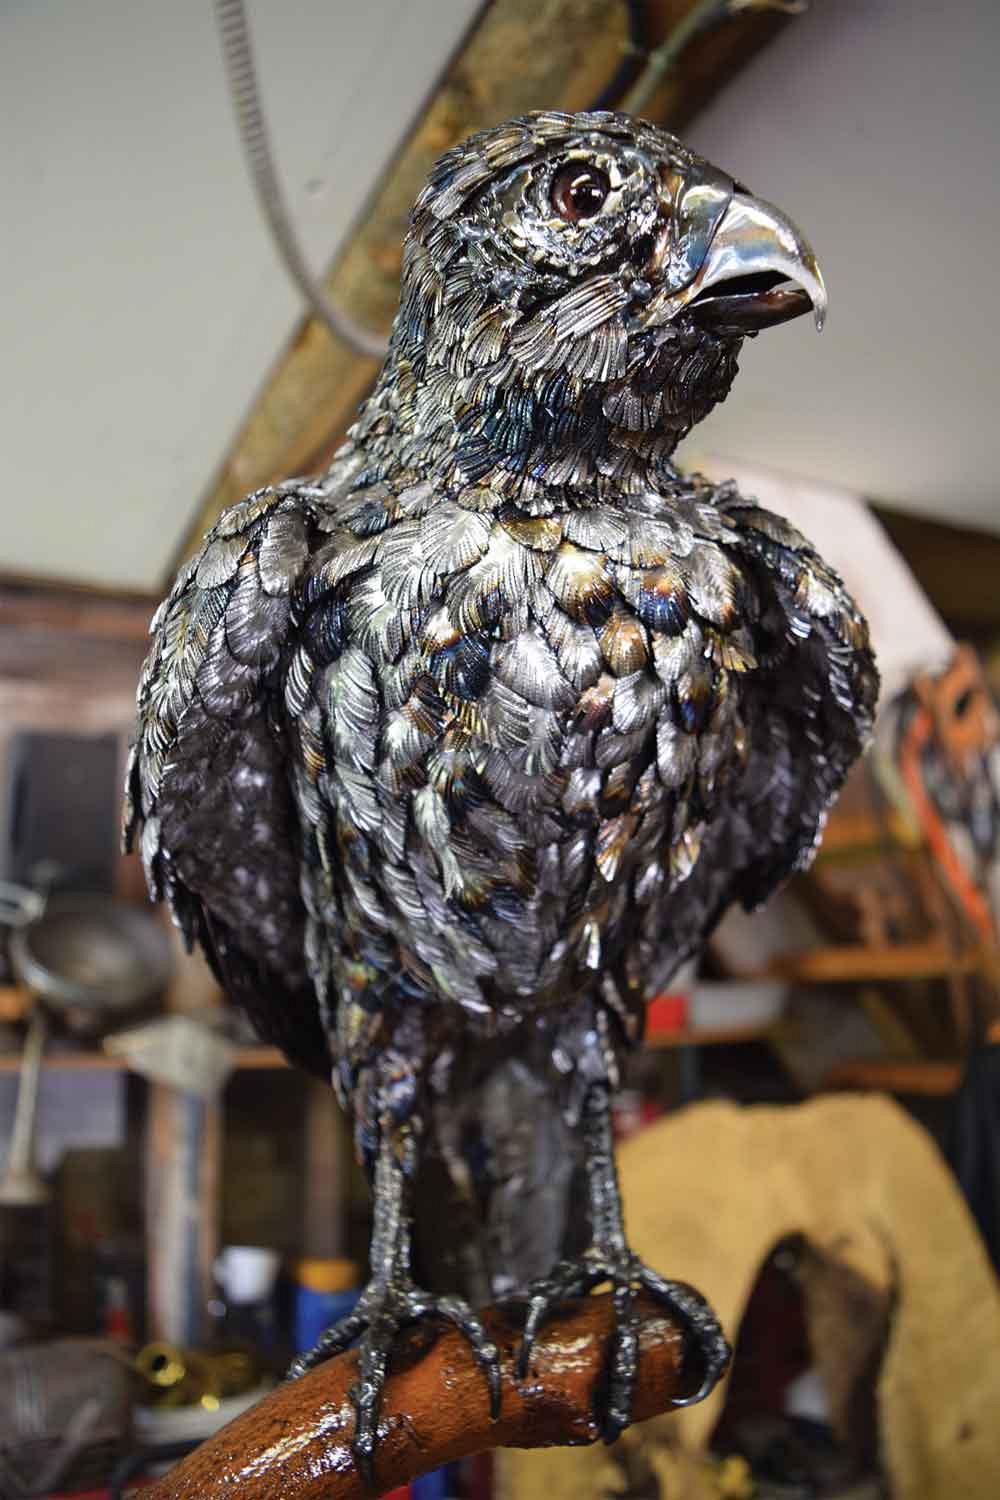 For this peregrine falcon, Baker was able to suggest the variation in the plumage on the bird's breast by using stainless steel for some of the feathers.